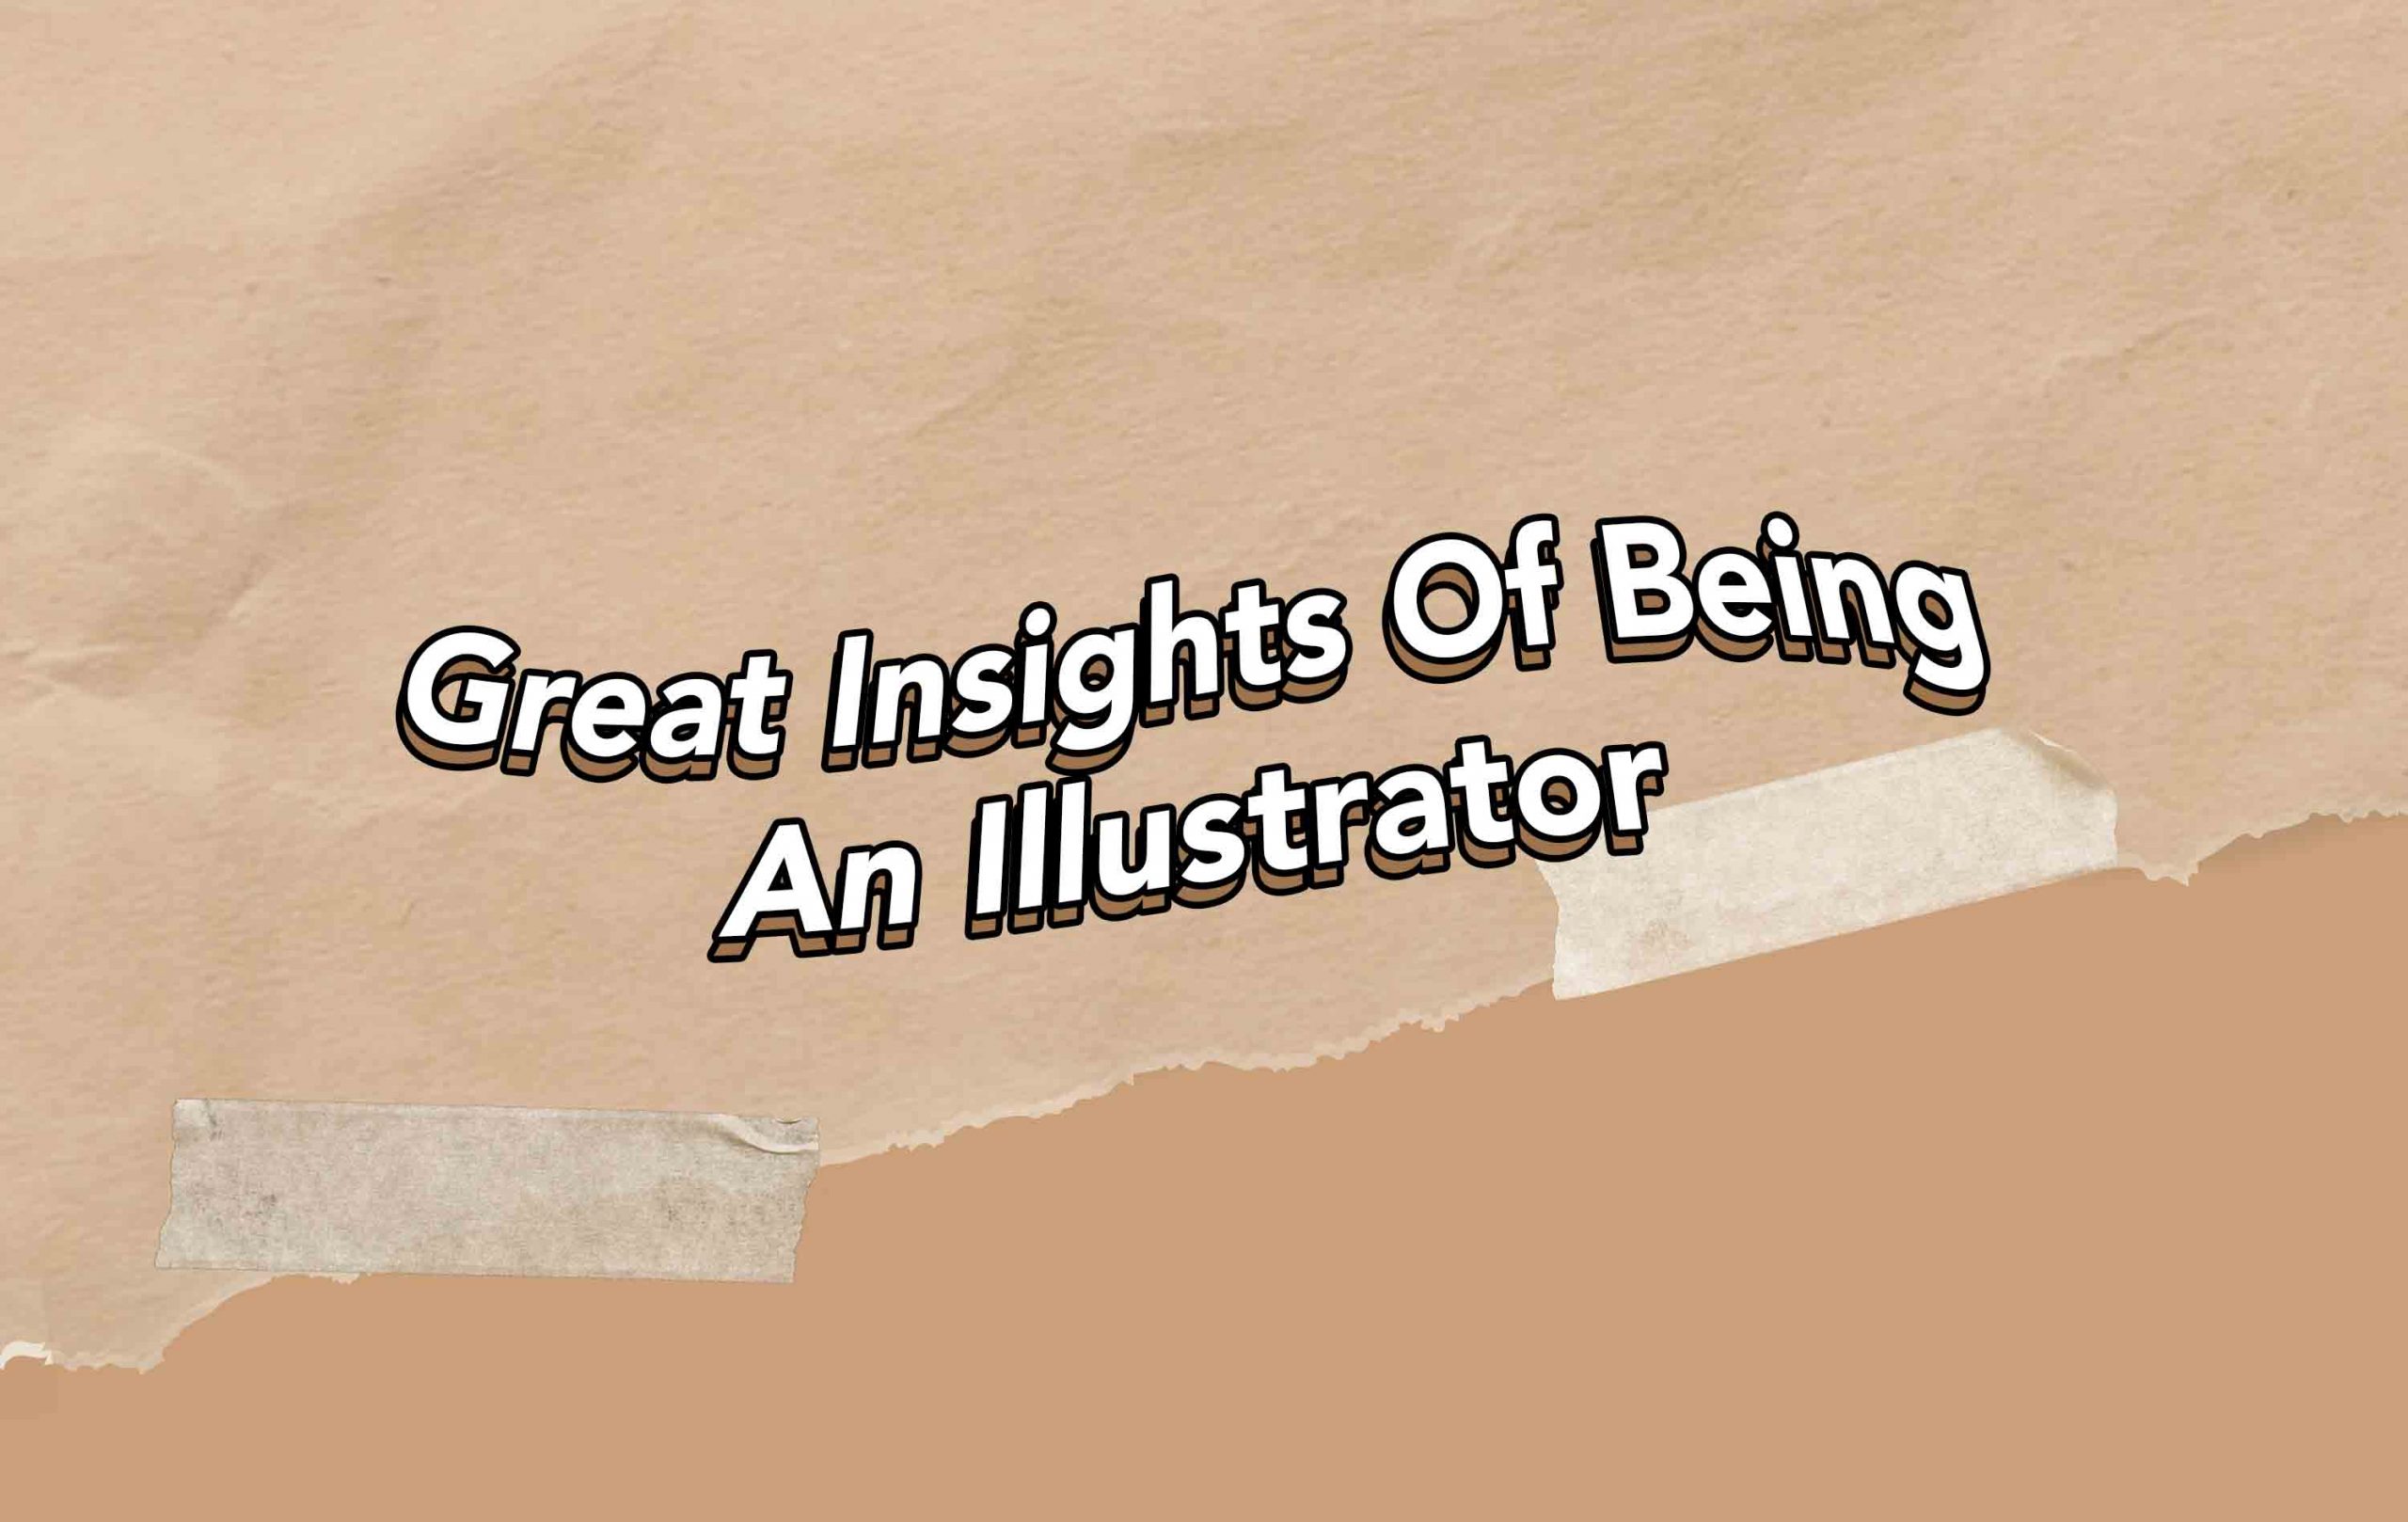 Great Insights Of Being An Illustrator